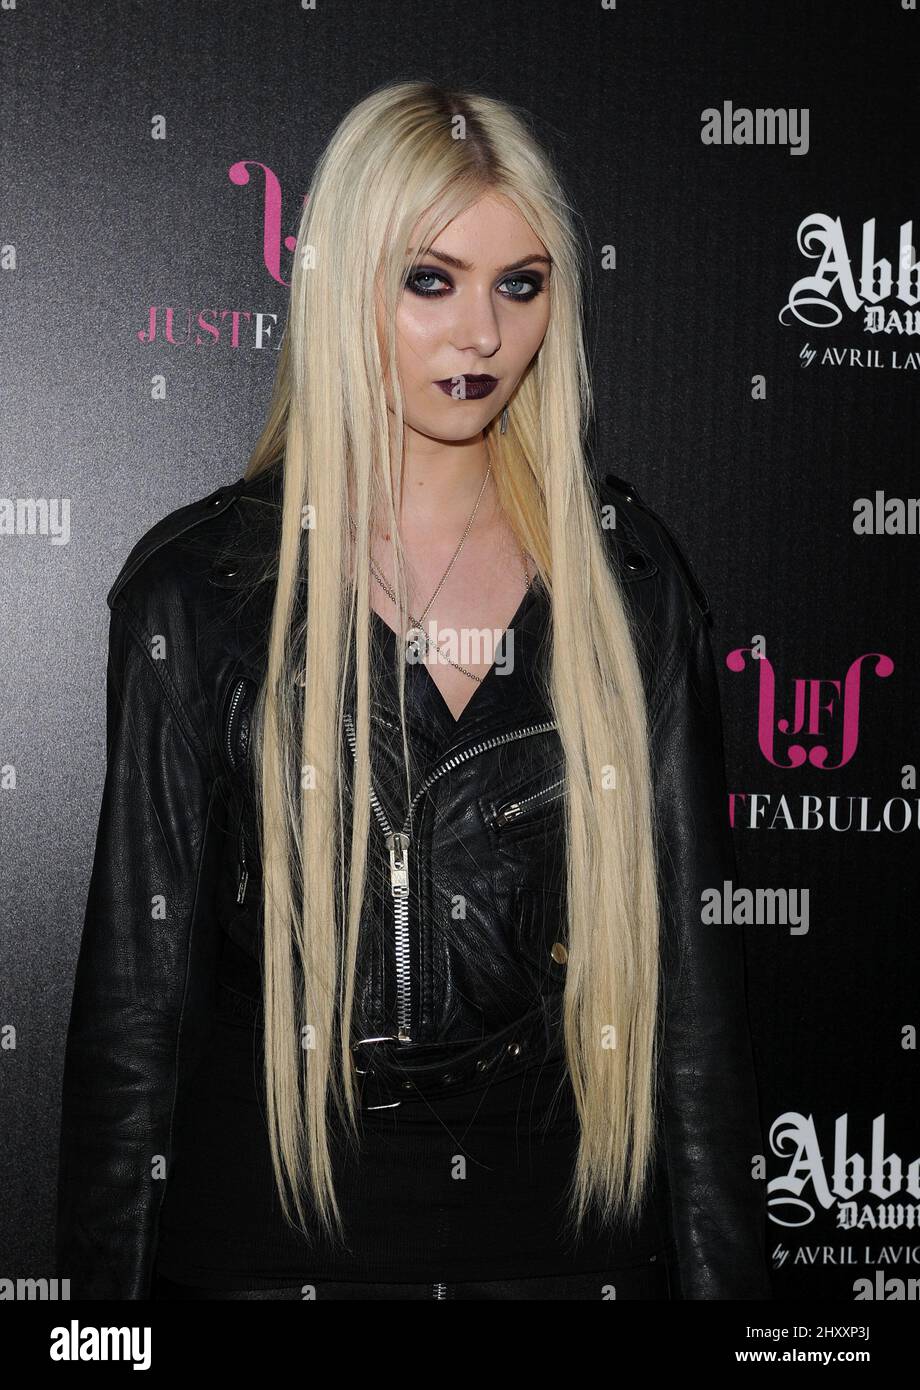 Taylor Momsen attending the 'Abbey Dawn by Avril Lavigne' Launch Party held at the Viper Room in Los Angeles, USA. Stock Photo